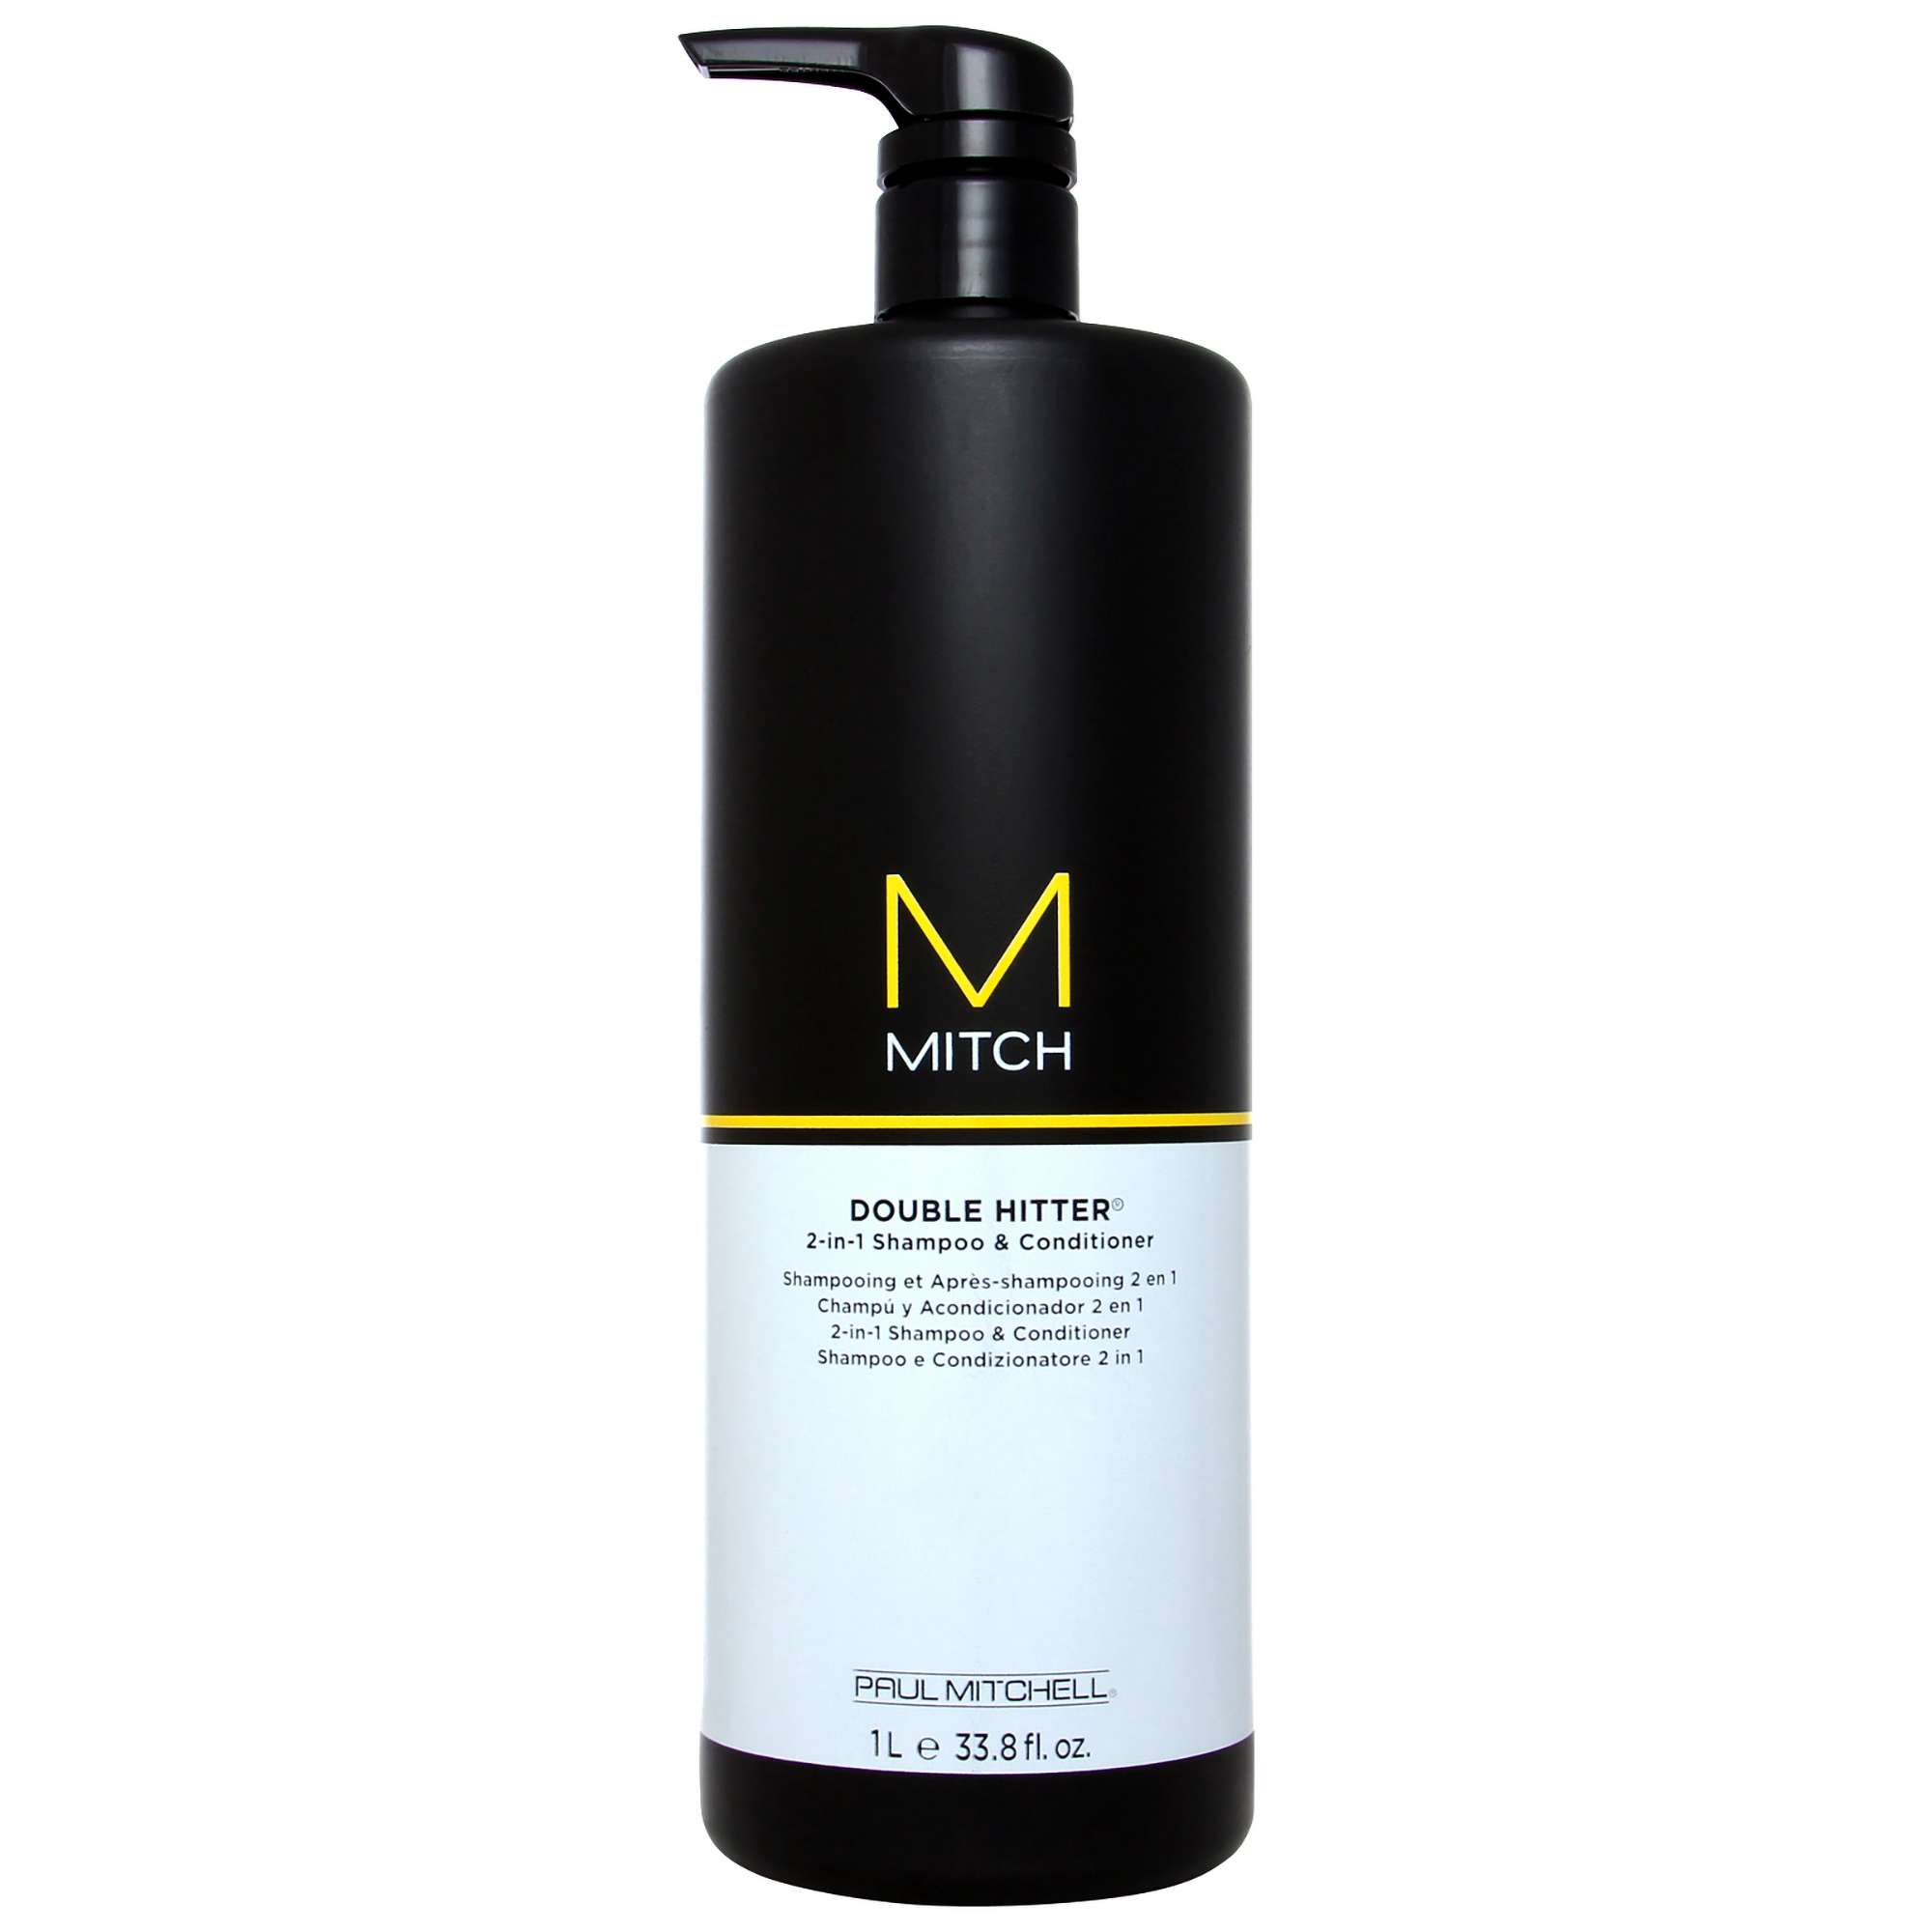 Image of Paul Mitchell Mitch Double Hitter 2-in-1 Shampoo and Conditioner Salon Size 1000ml